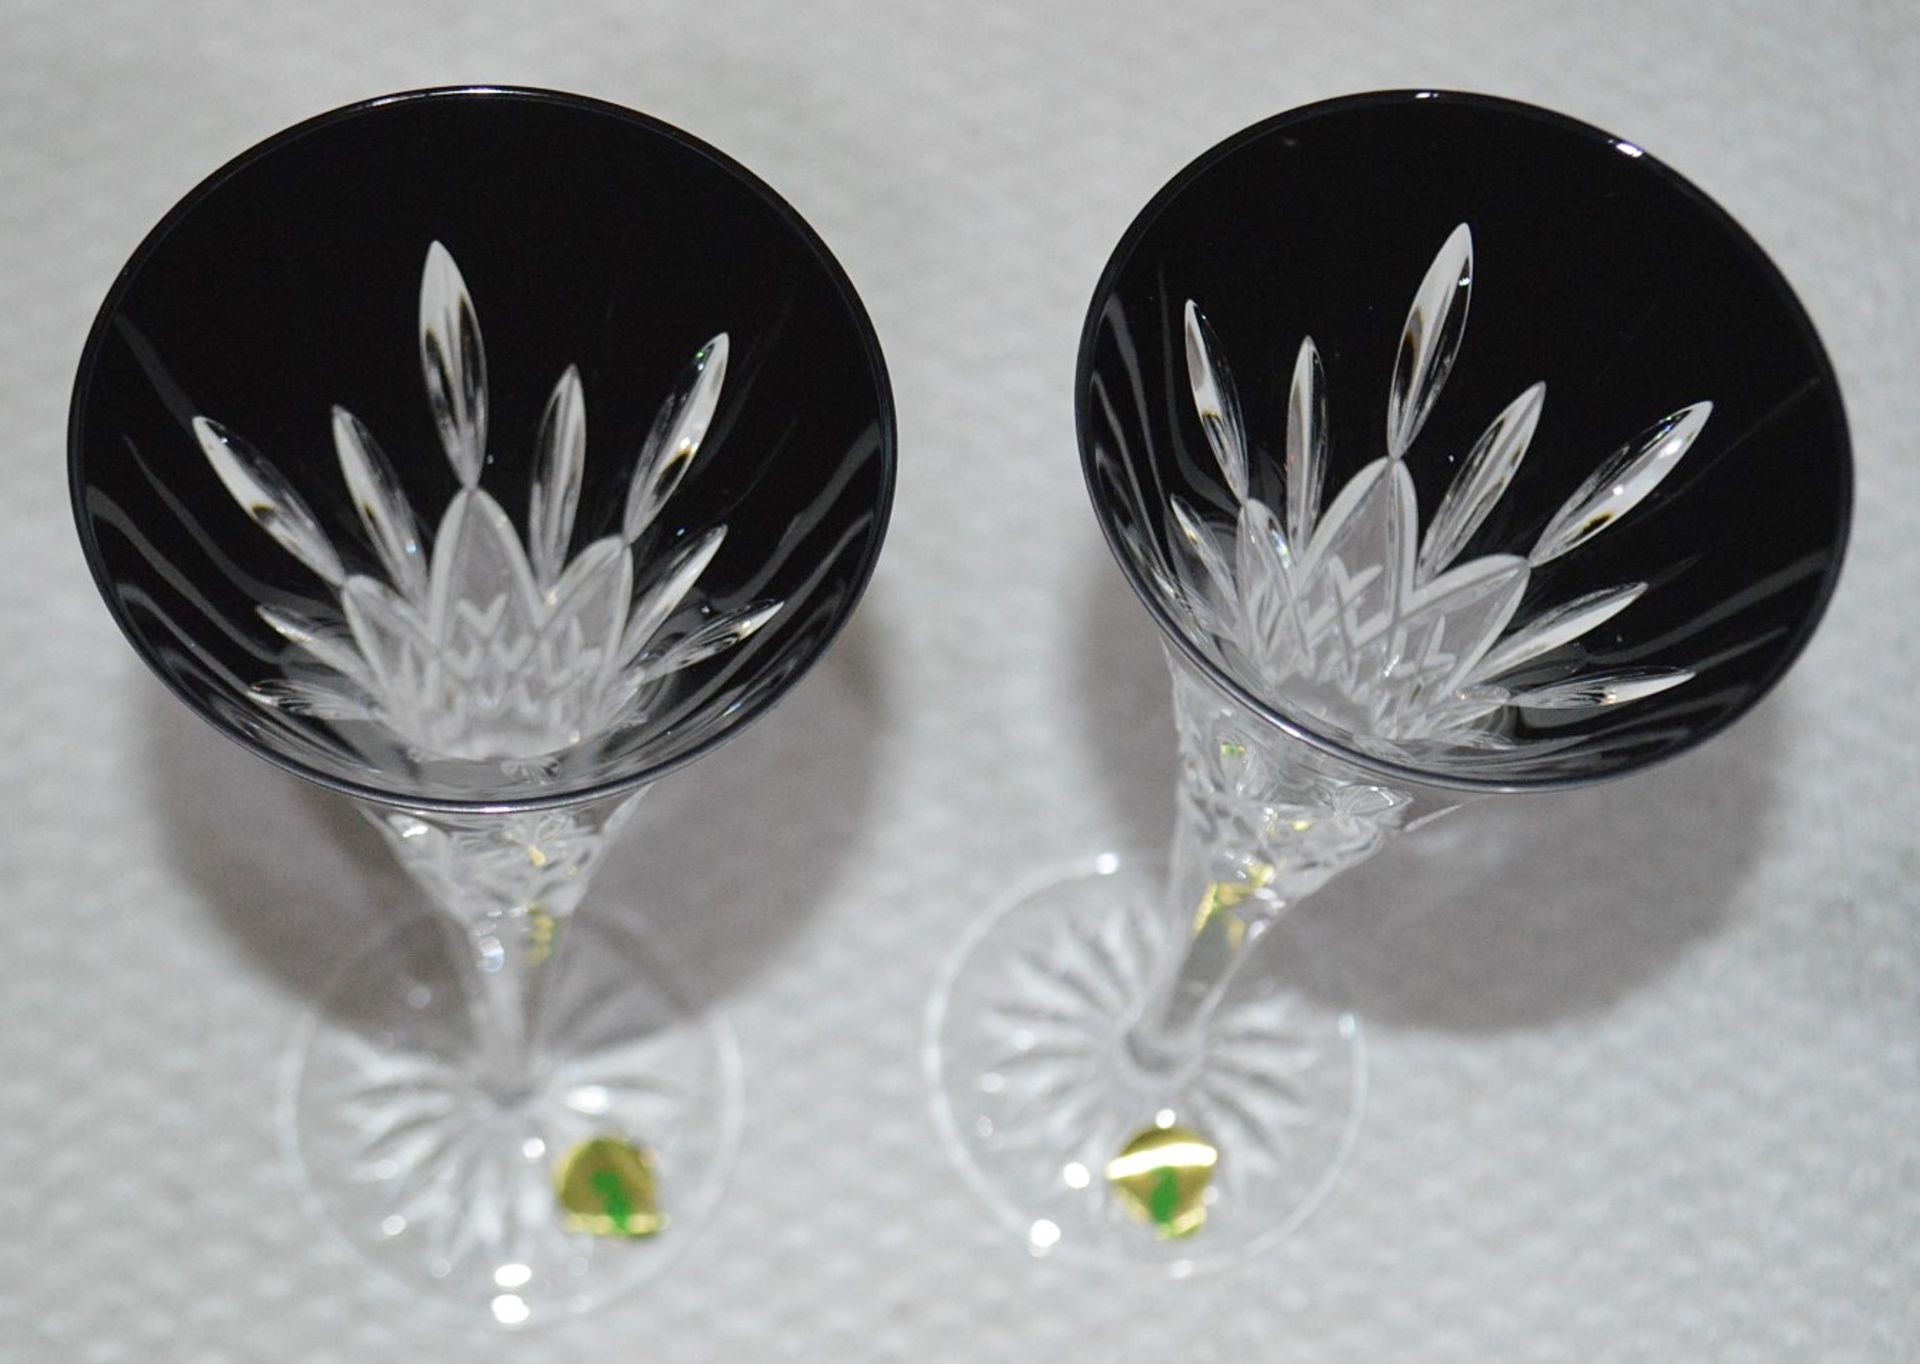 Set of 2 x WATERFORD Lismore Toasting Flutes (120ml) - Height: 25.5cm approx - Original Price £140 - Image 3 of 8